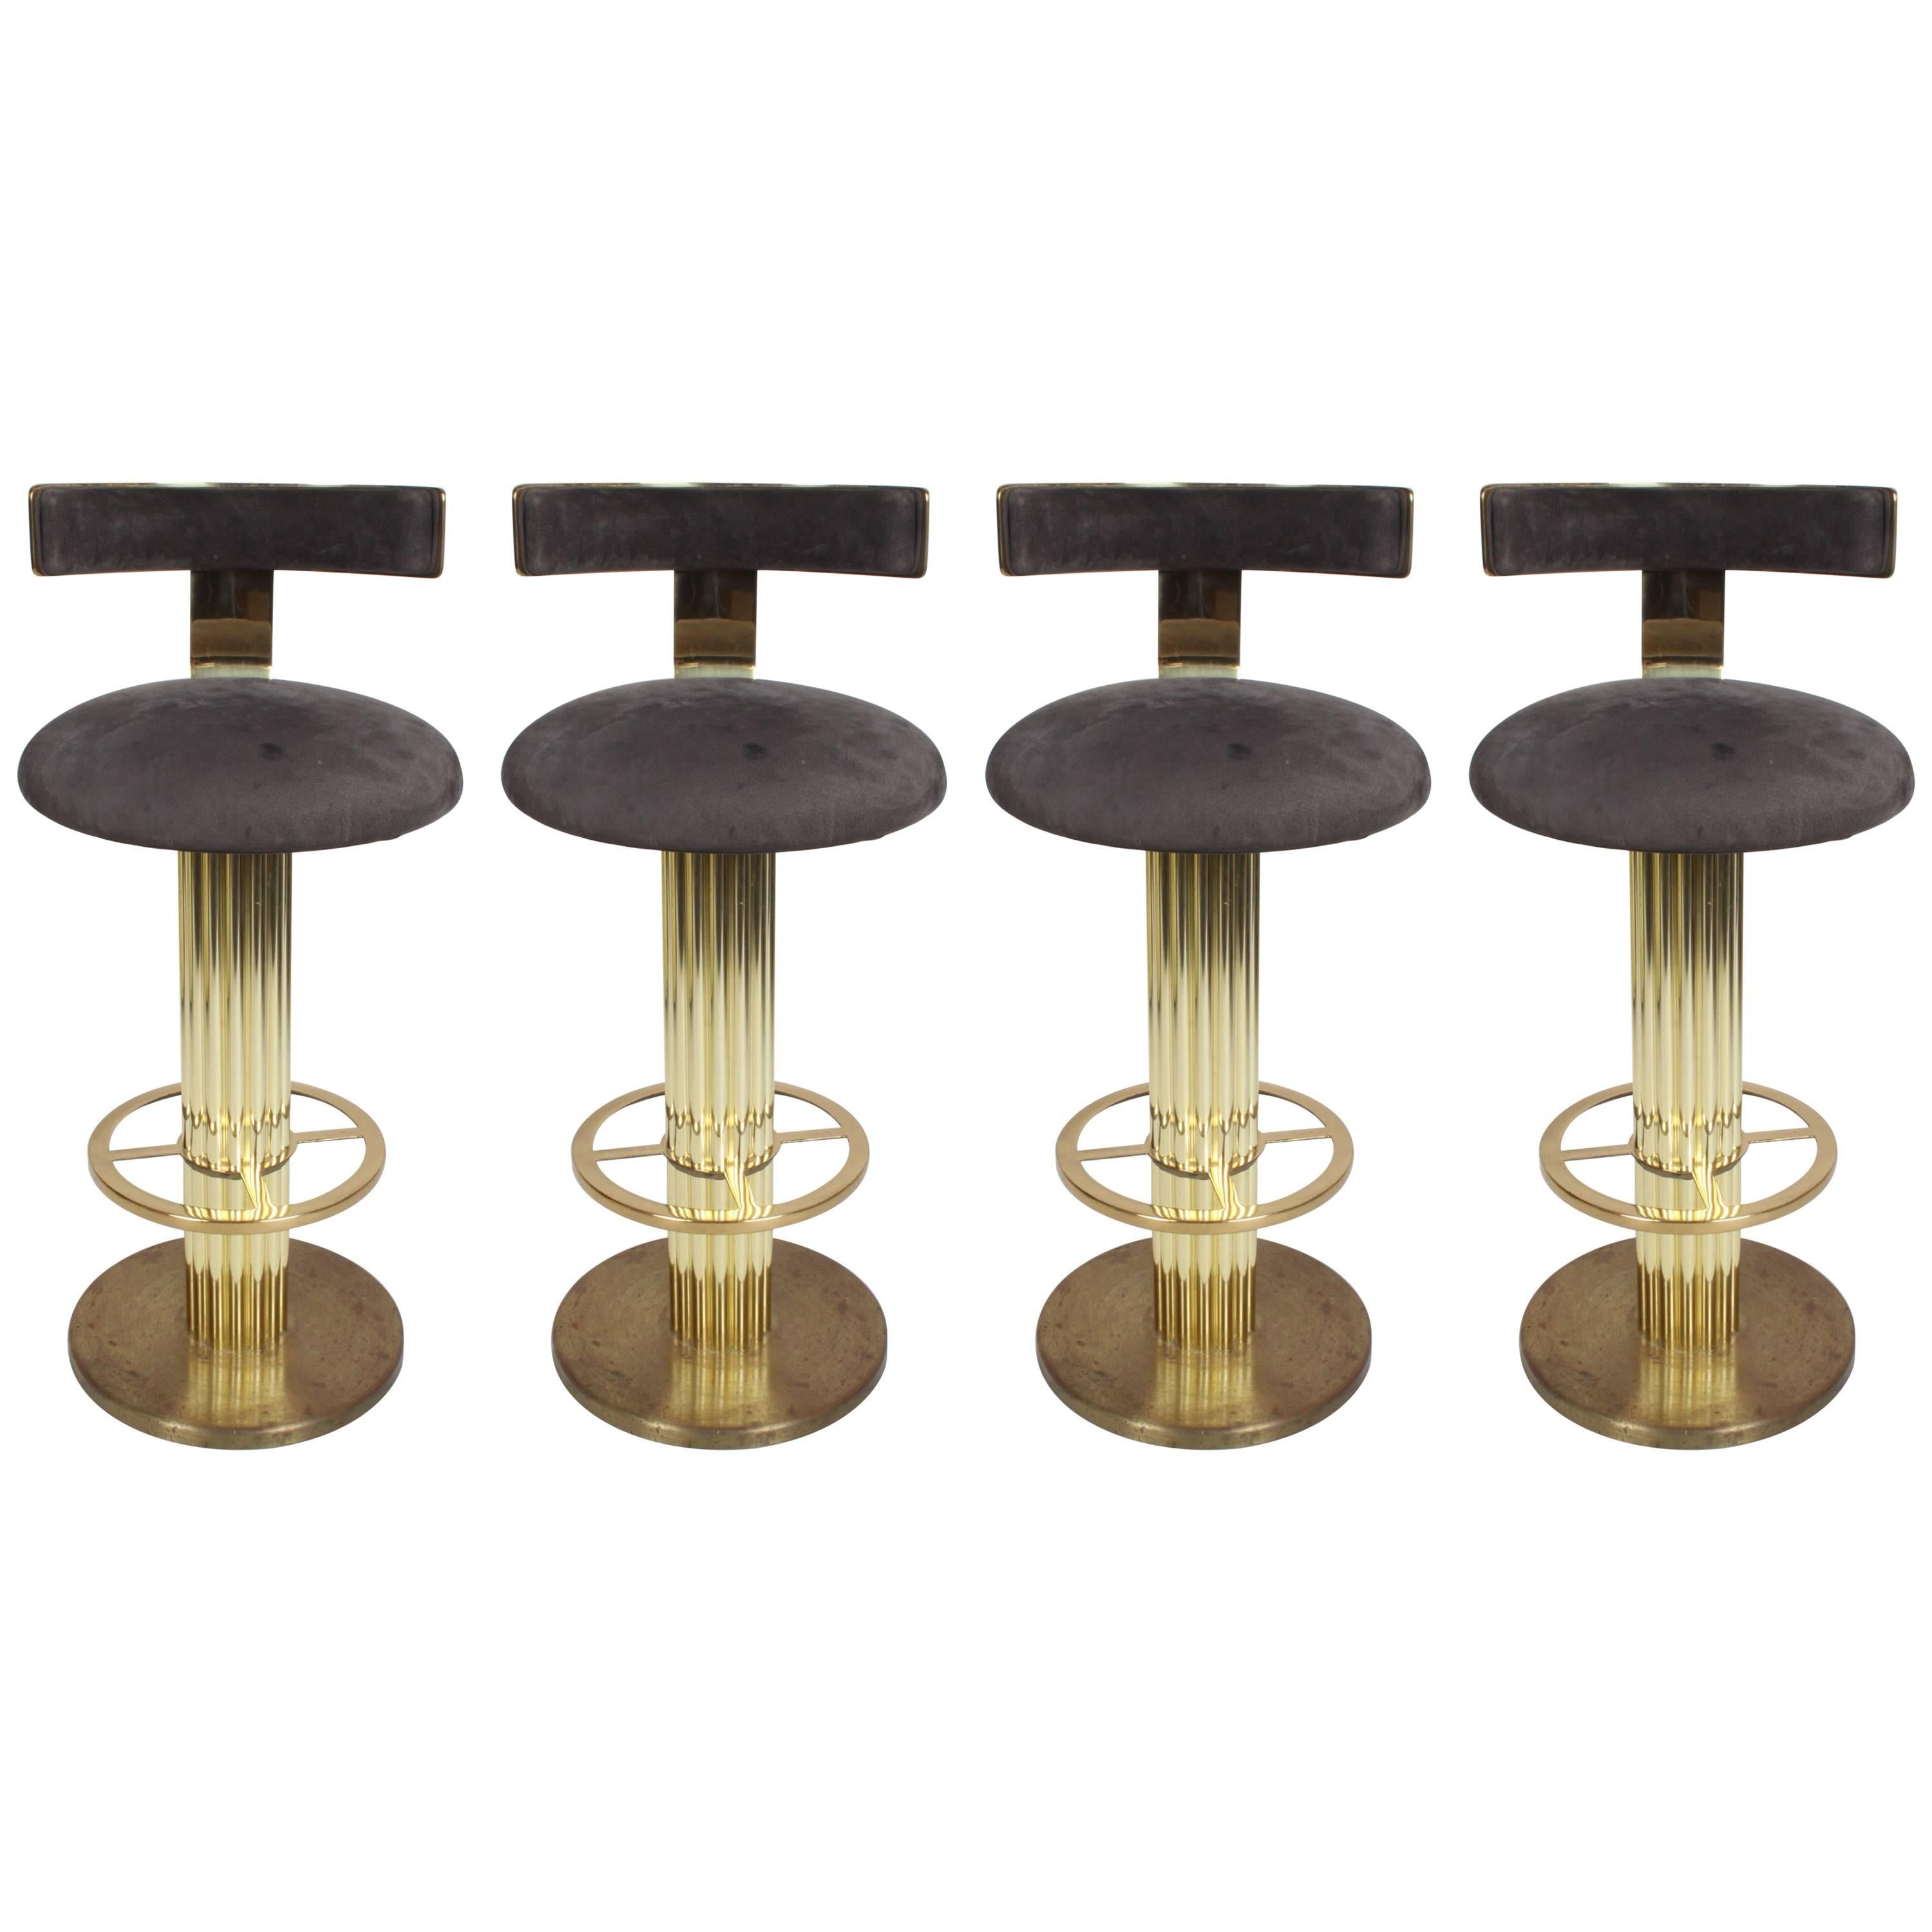 Set of Four "Excalibur" Bar Stools in Channeled Brass by Design for Leisure